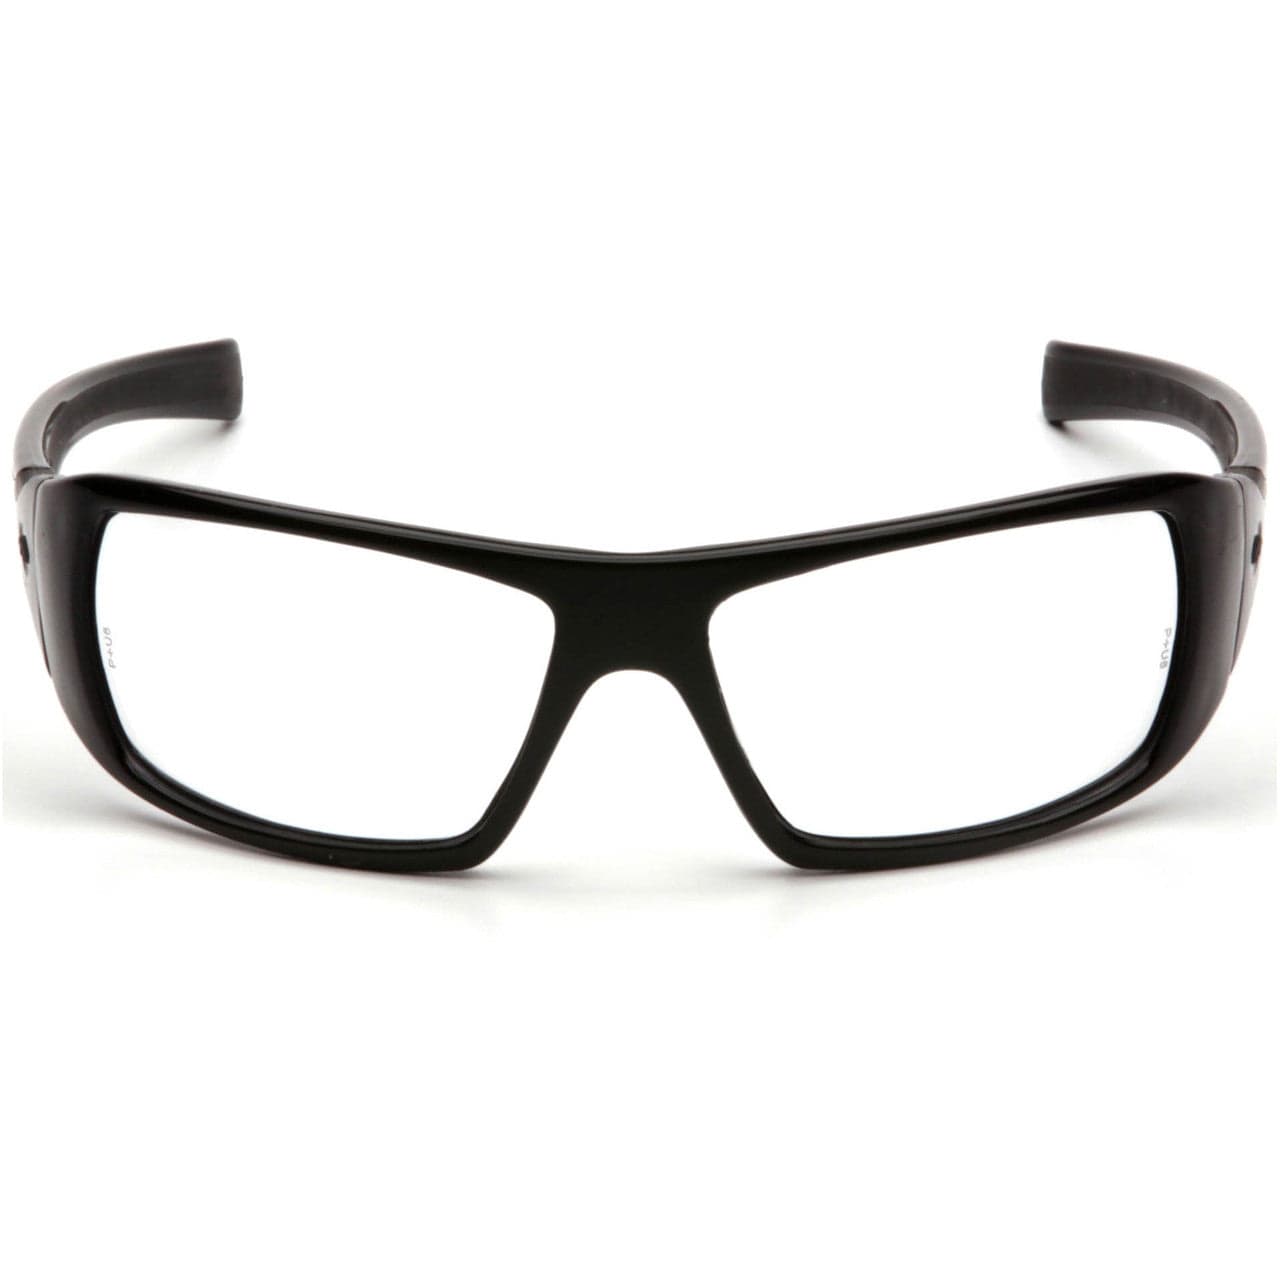 Pyramex Goliath Safety Glasses with Black Frame and Clear Lens SB5610D Front View